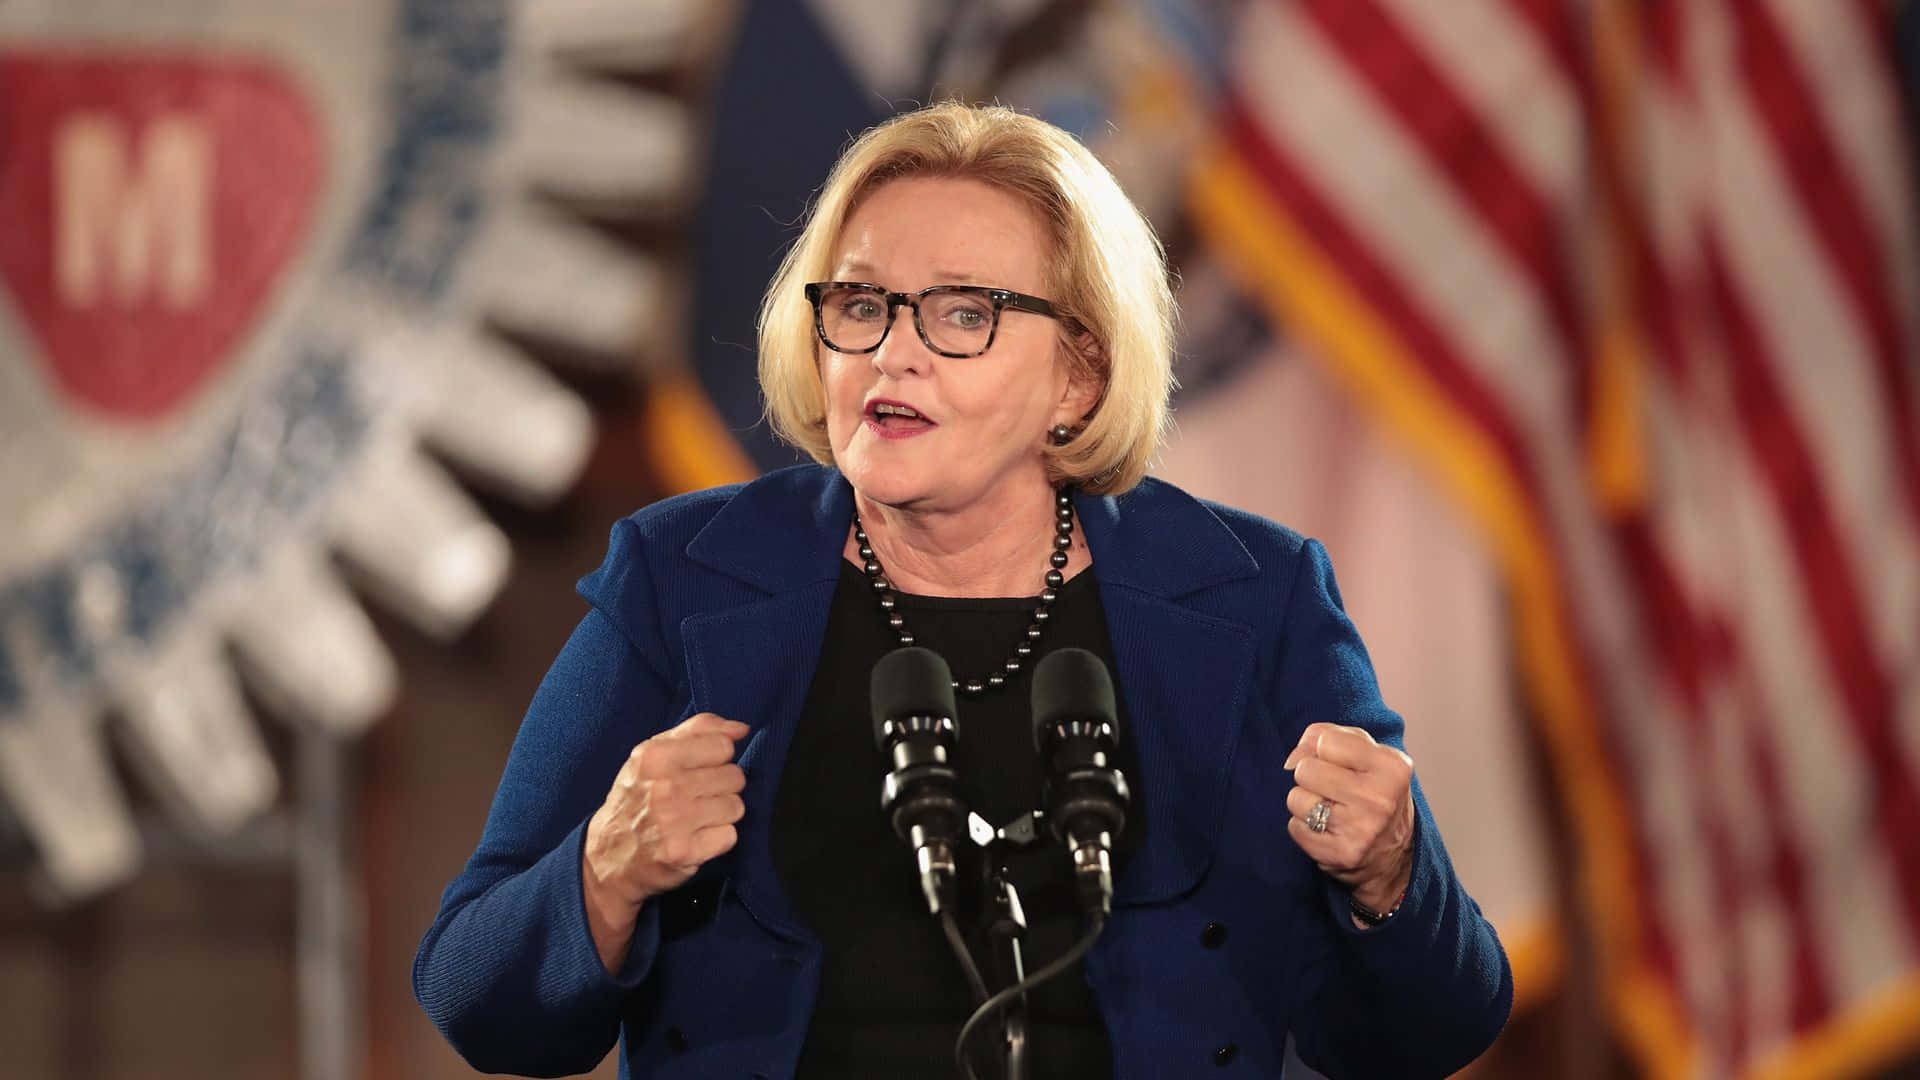 Claire Mccaskill With Clenched Fists Wallpaper